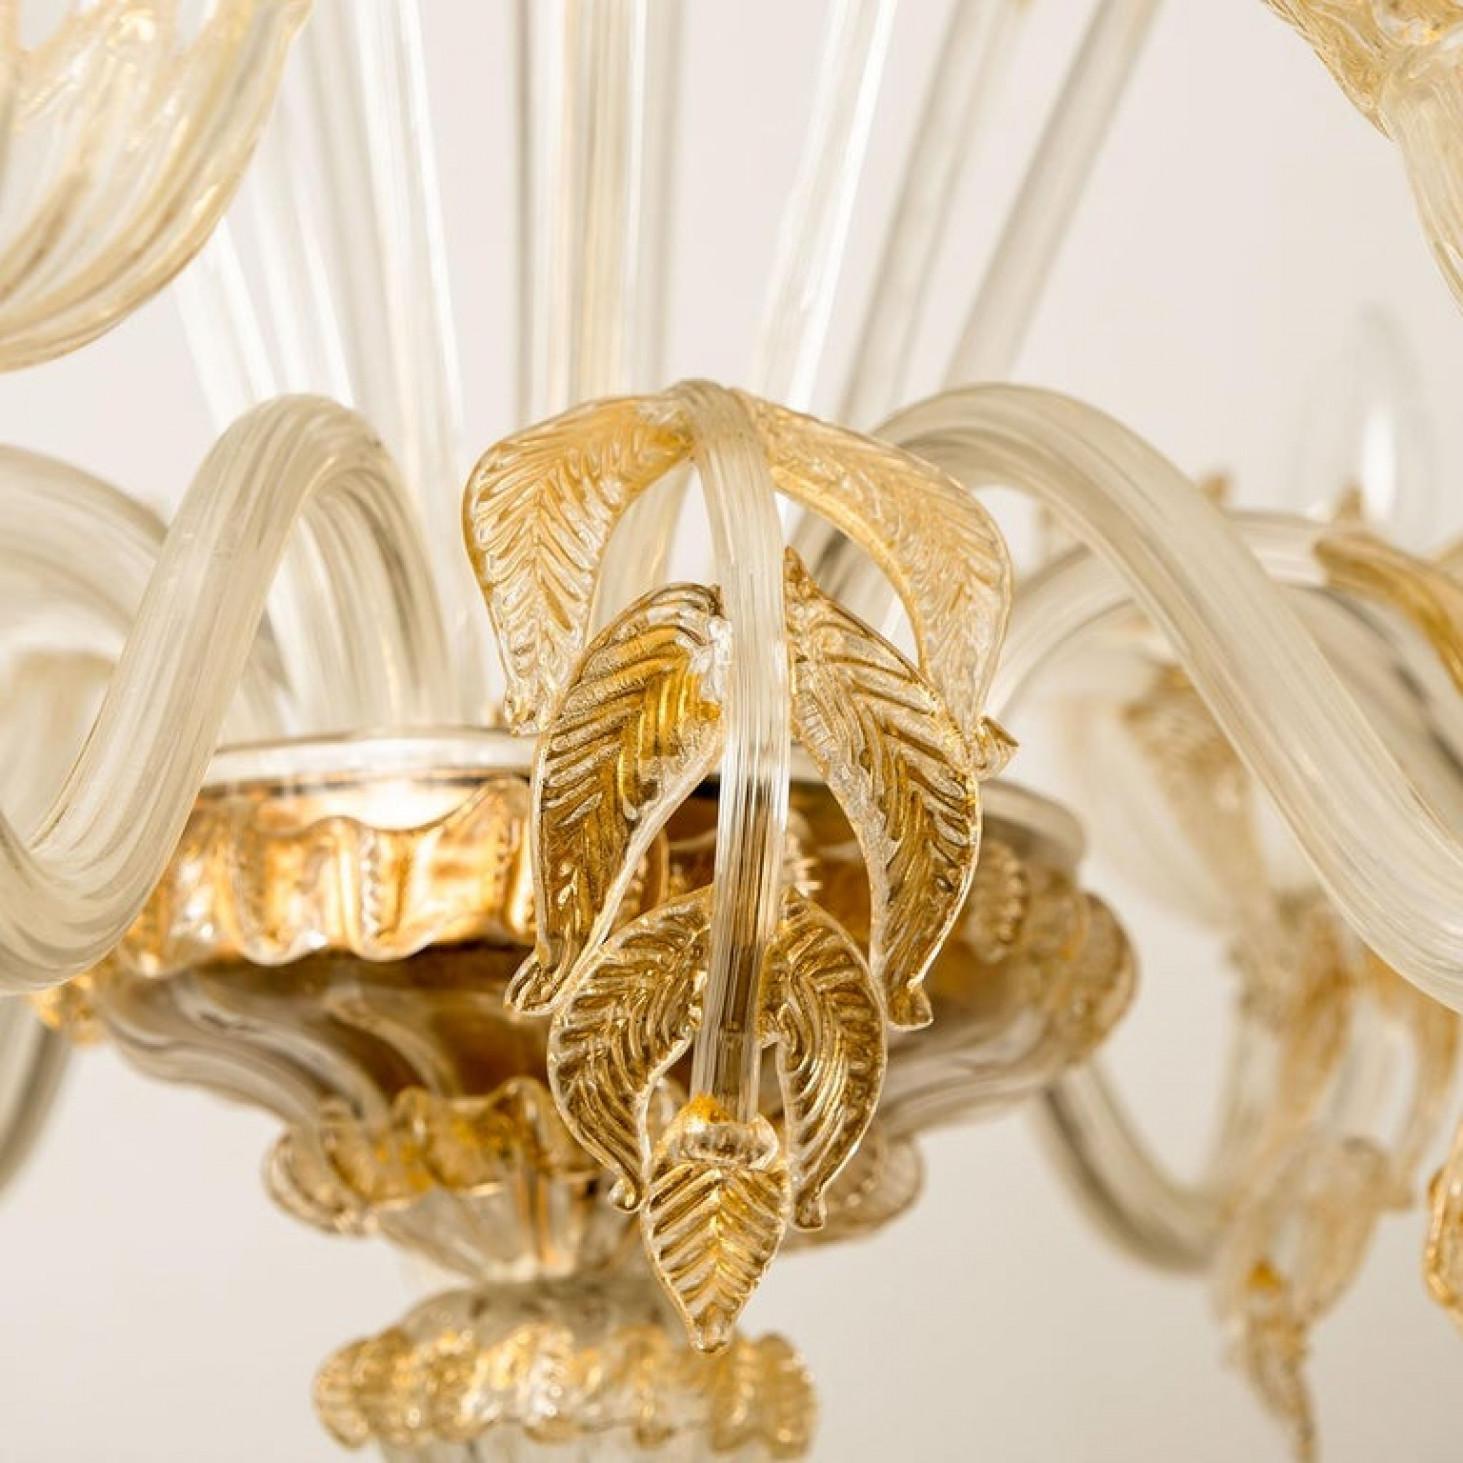 Large Venetian Chandelier in Gilded Murano Glass, by Barovier, 1950s For Sale 1